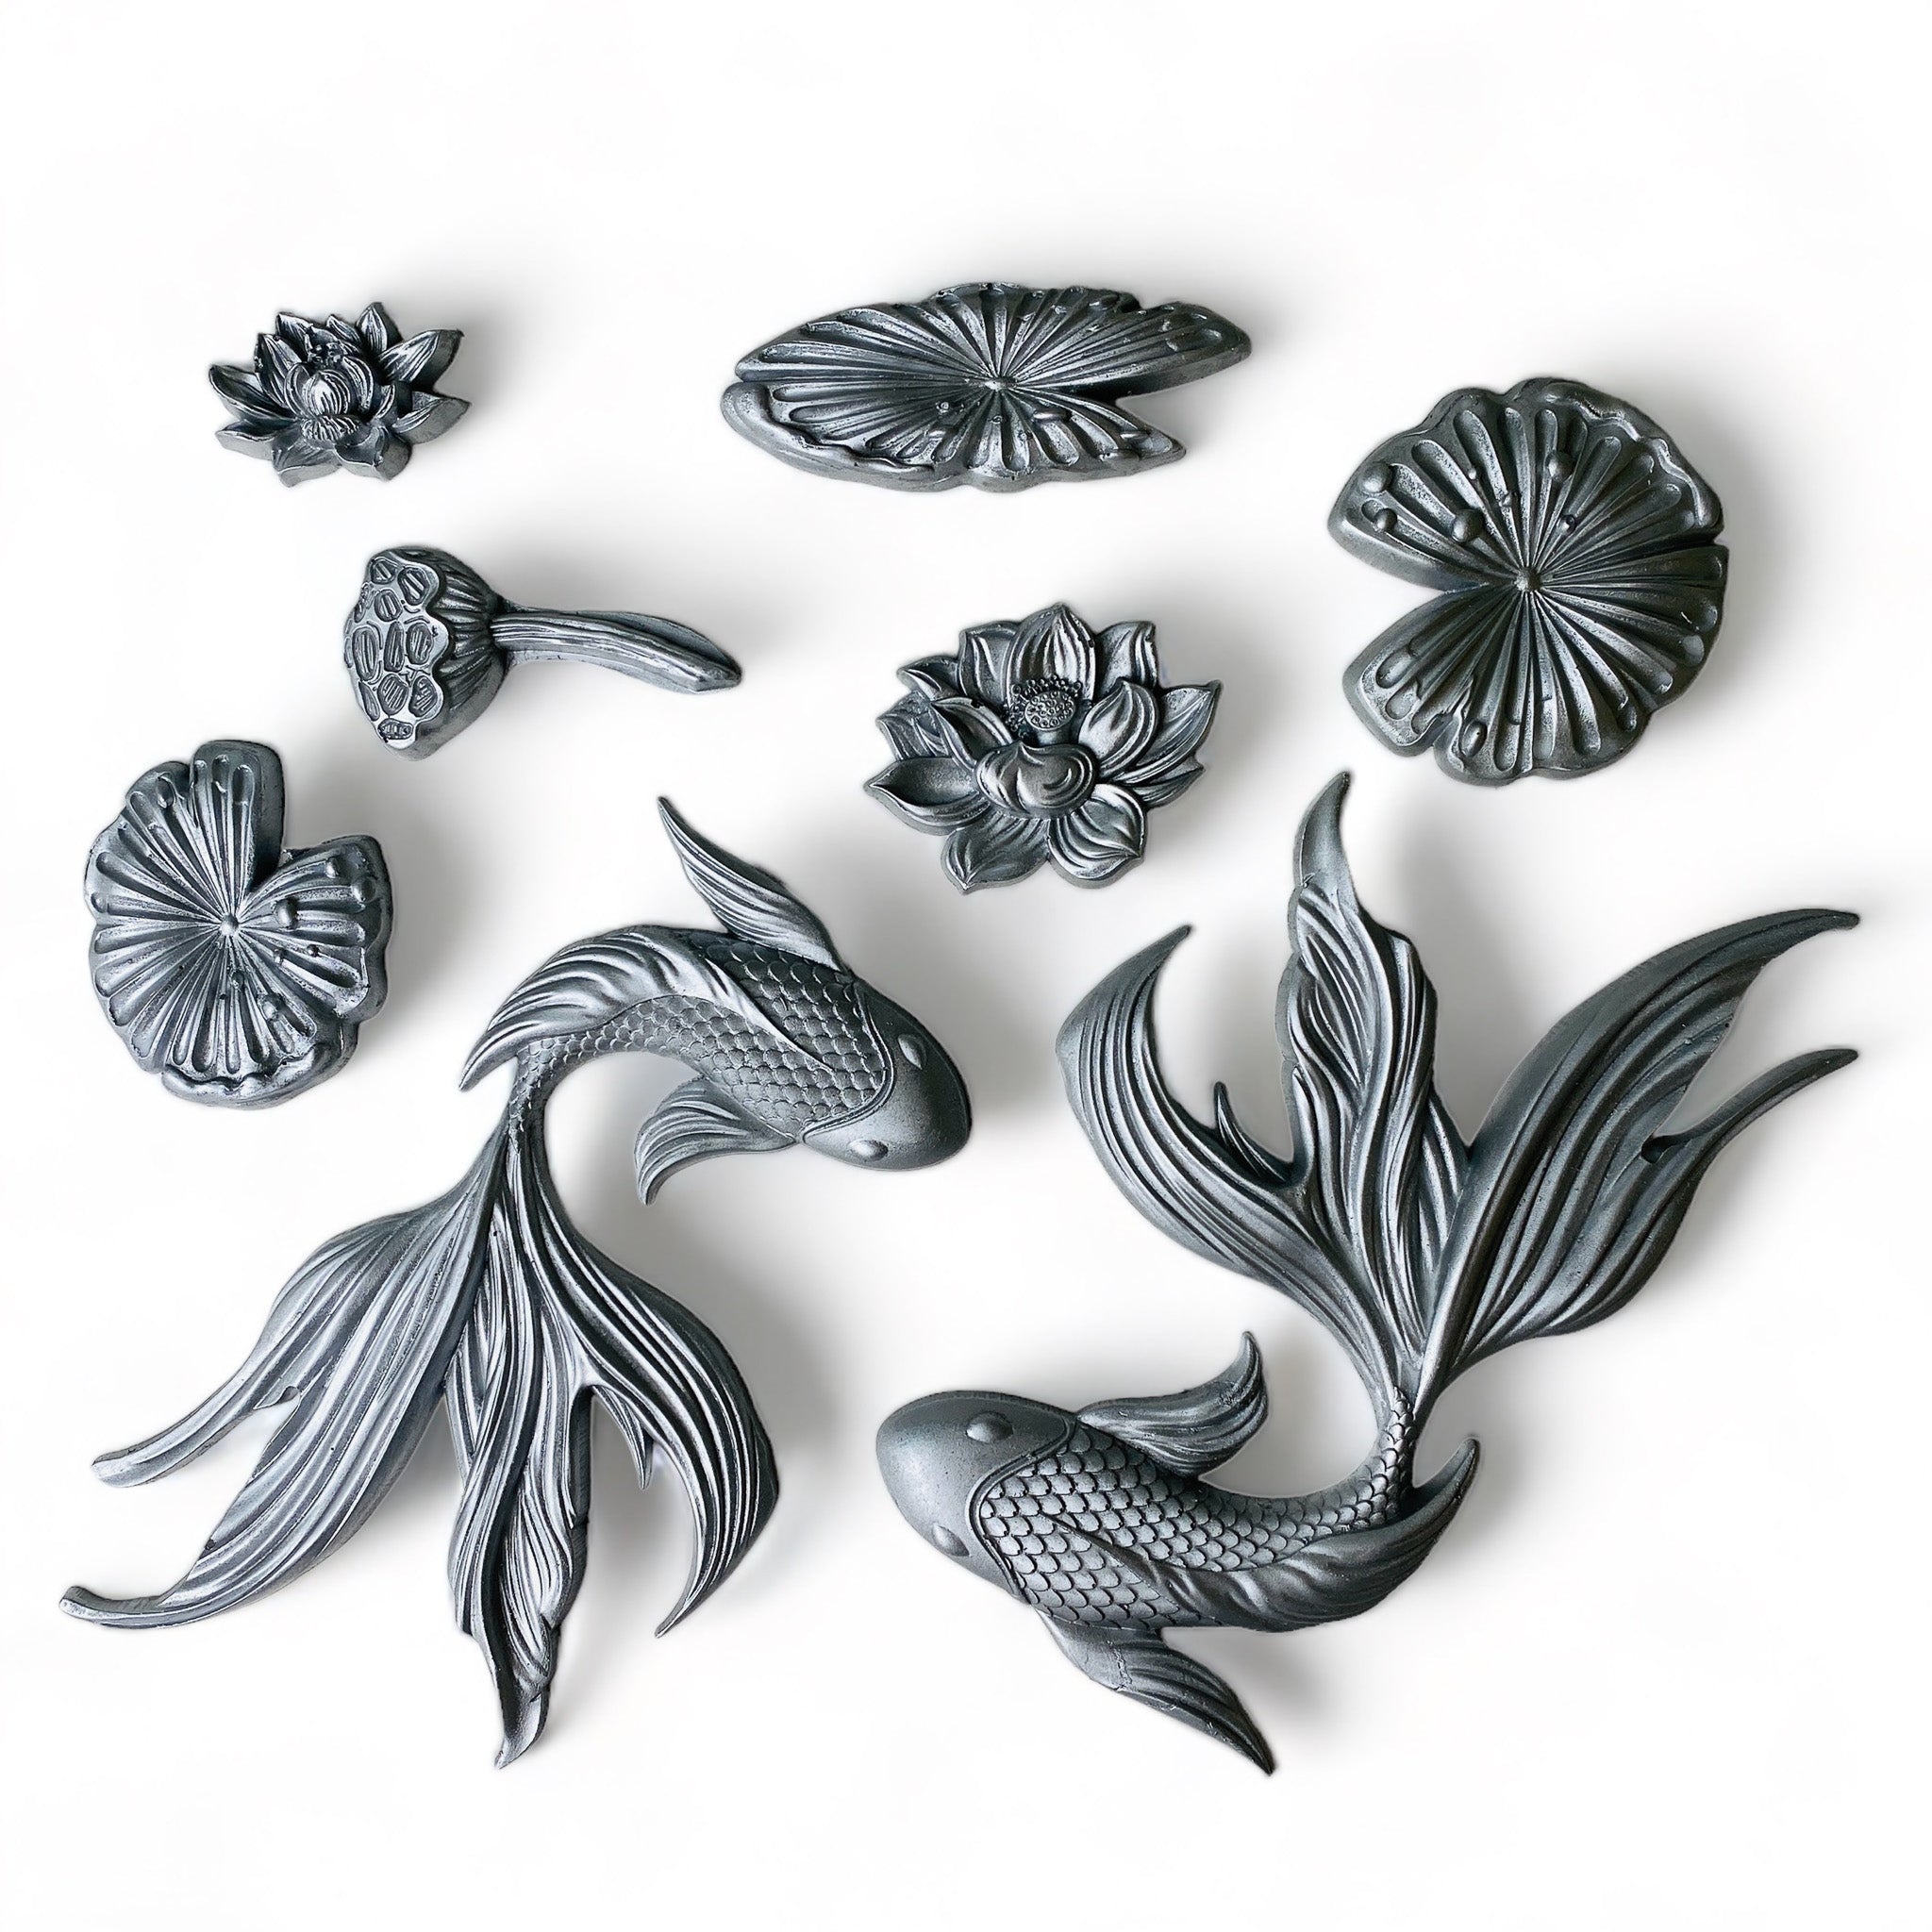 Silver-colored silicone mold castings featuring 2 intricately-detailed koi fish, surrounded by water lilies and lily pads are against a white background.